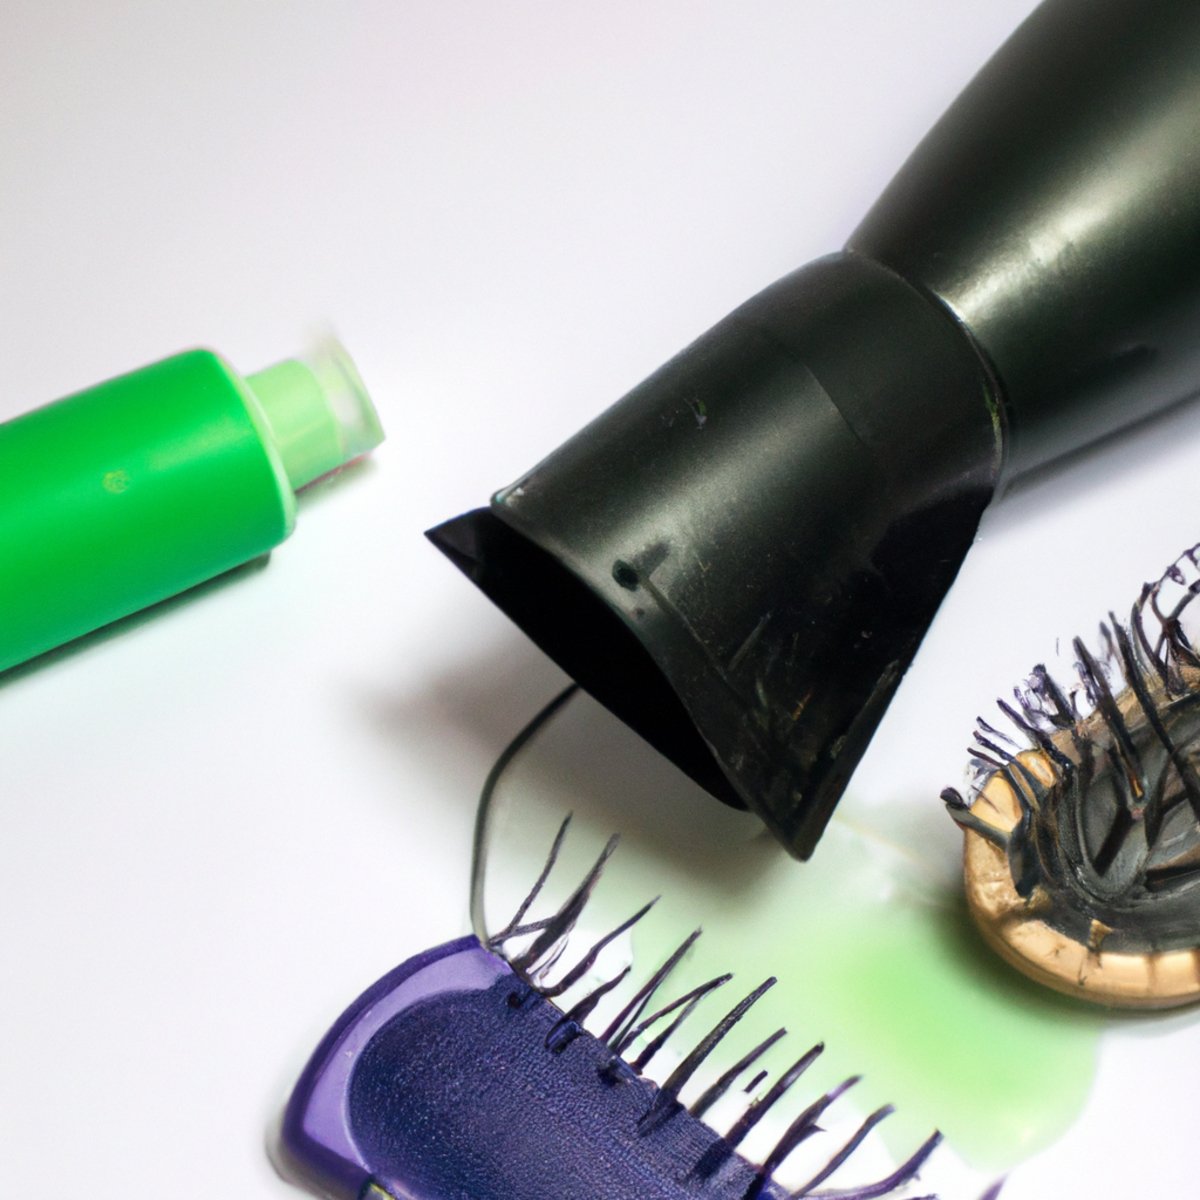 Hair care tools and products on white background, highlighting hair care myths and potential damage from coloring.